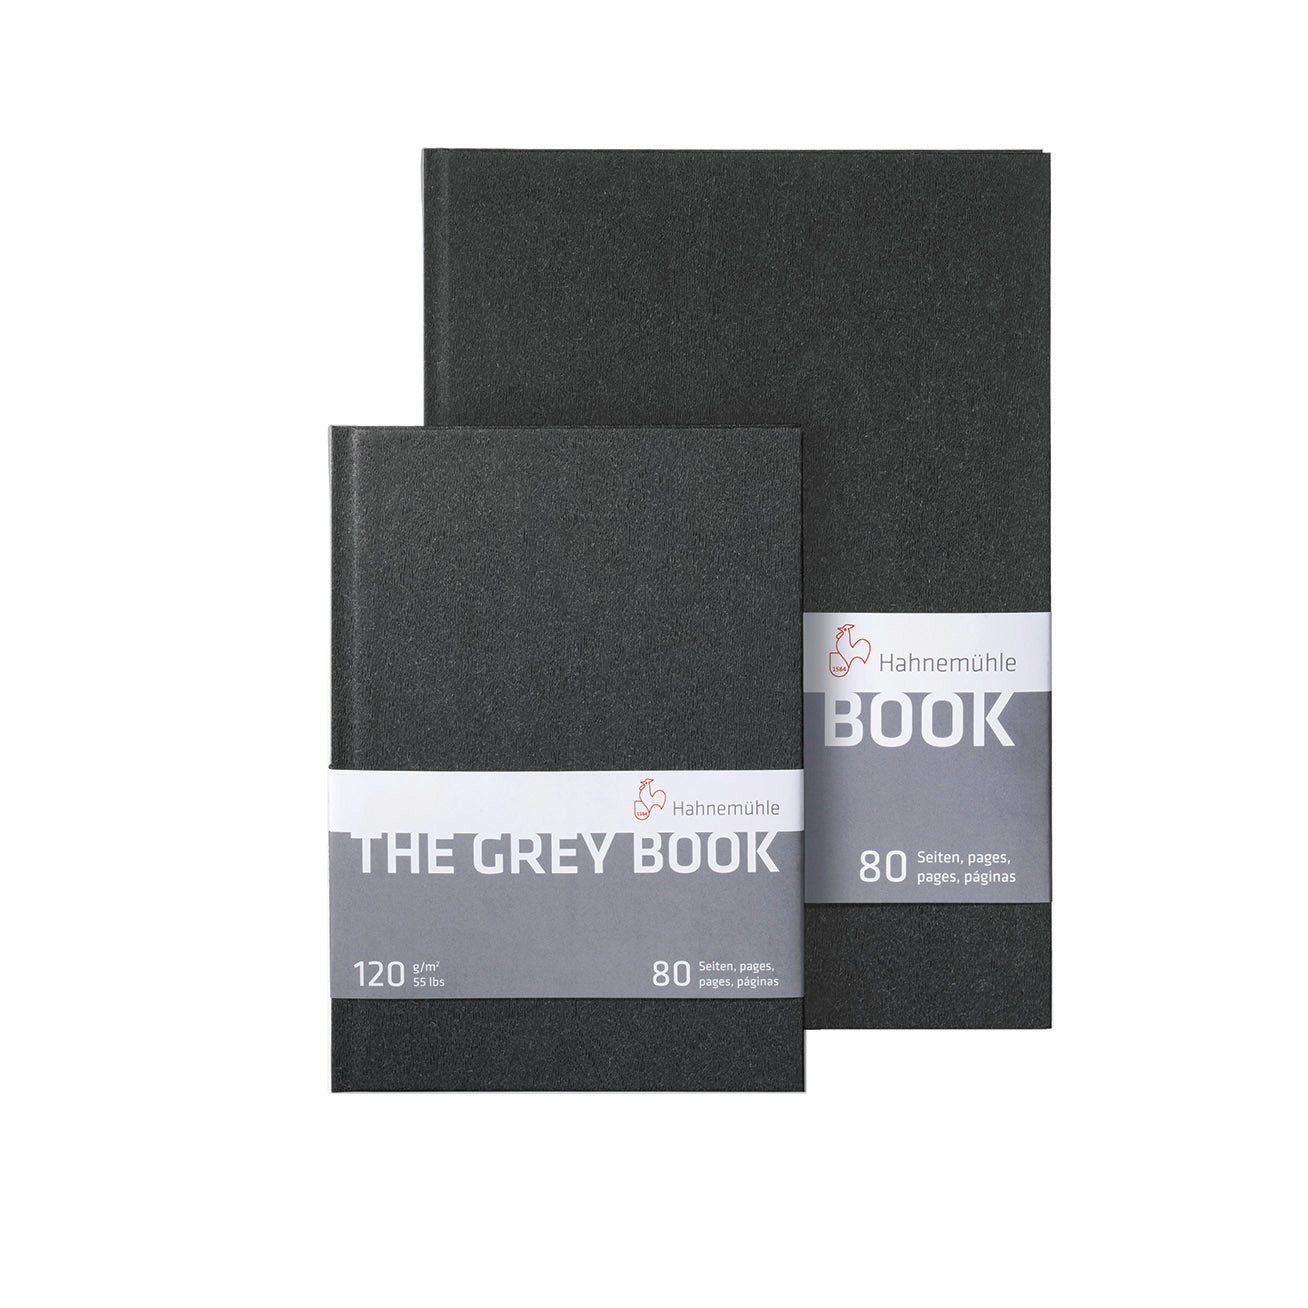 Hahnemuhle The Grey Sketch Book - Melbourne Etching Supplies